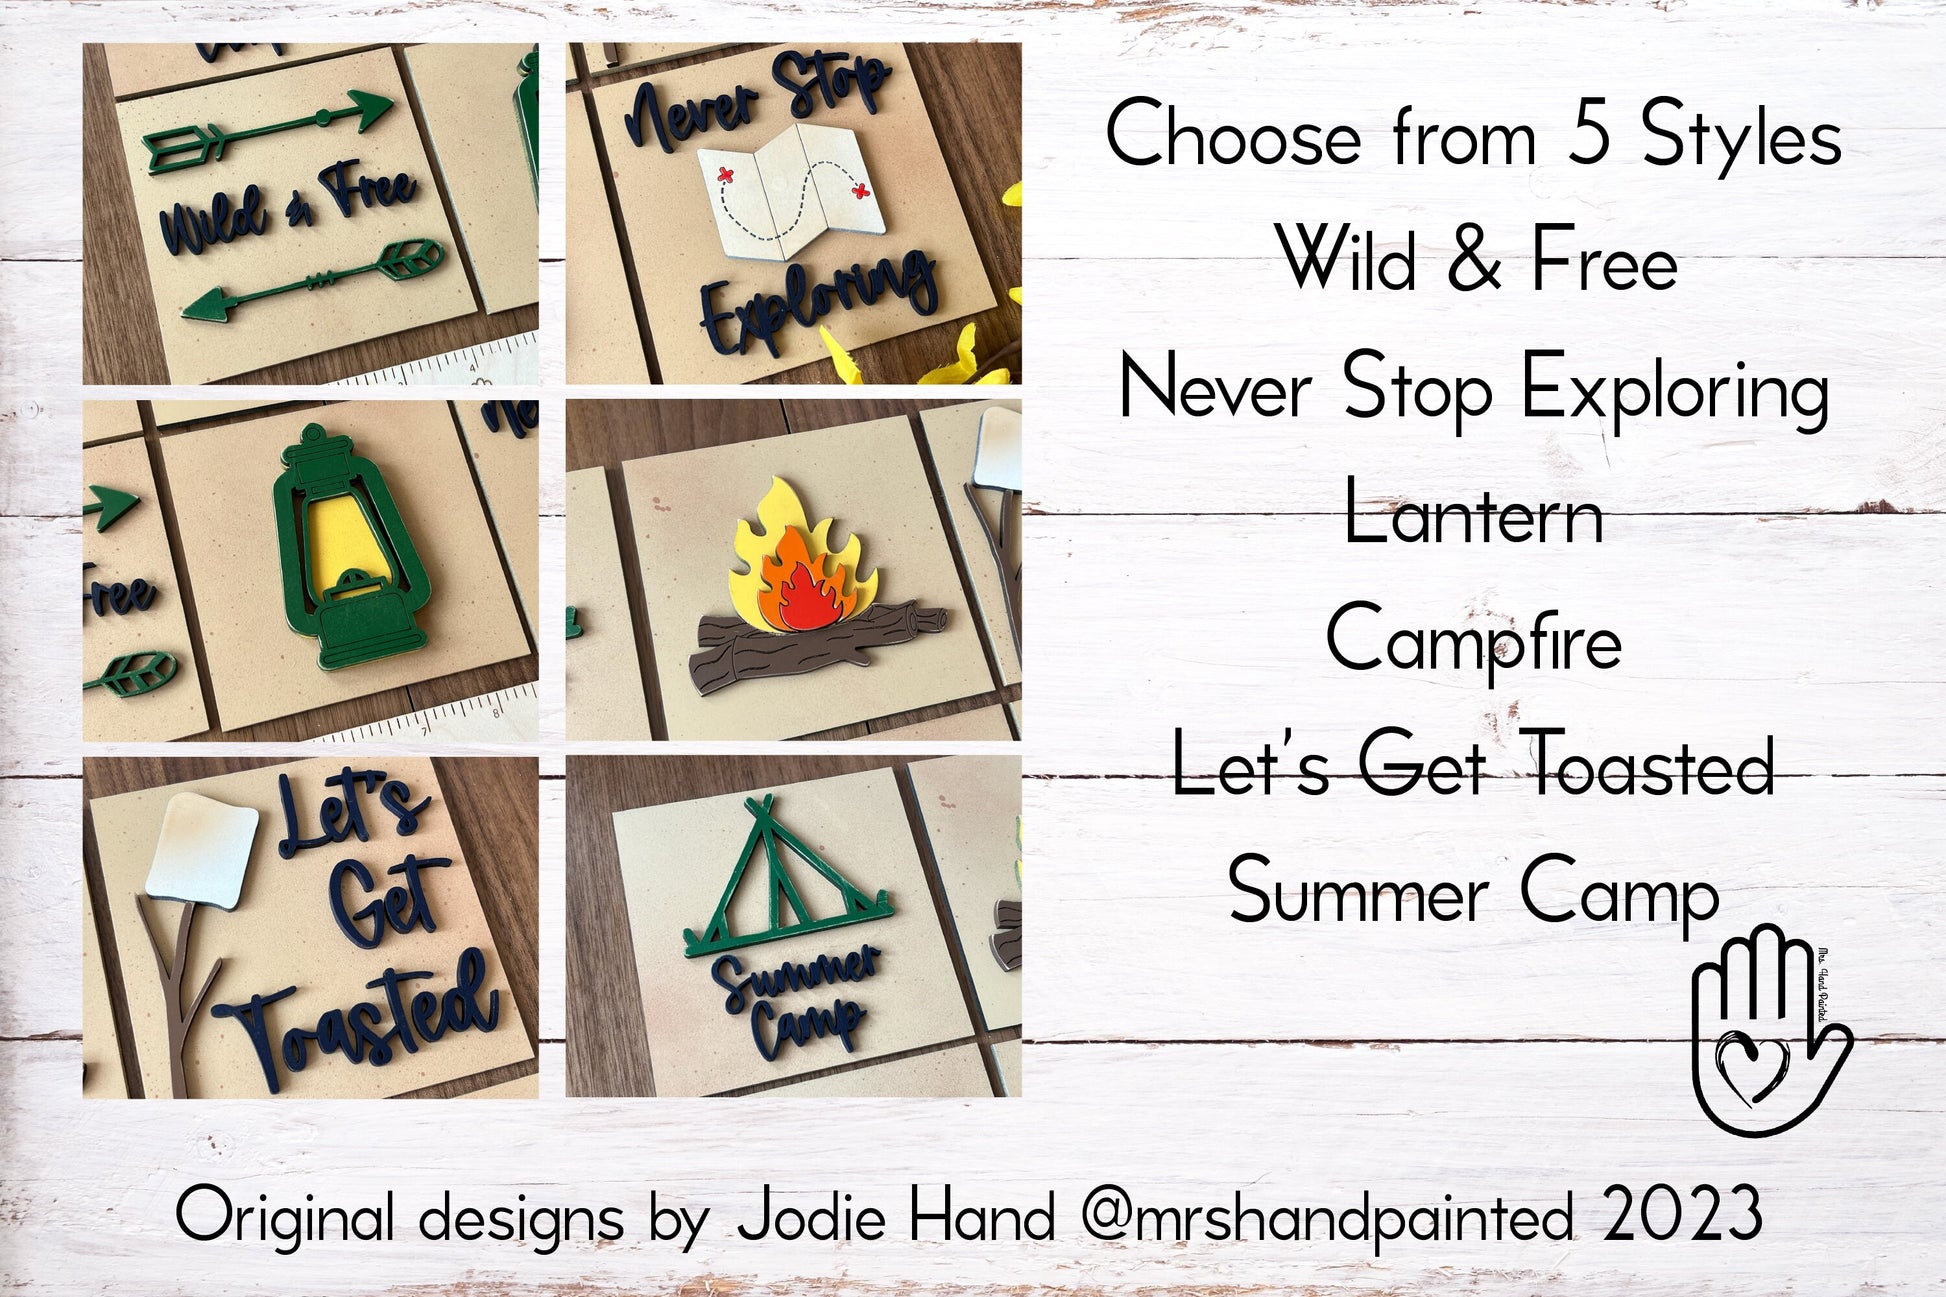 Summer Camp Interchangeable Signs - Laser Cut Wood Painted